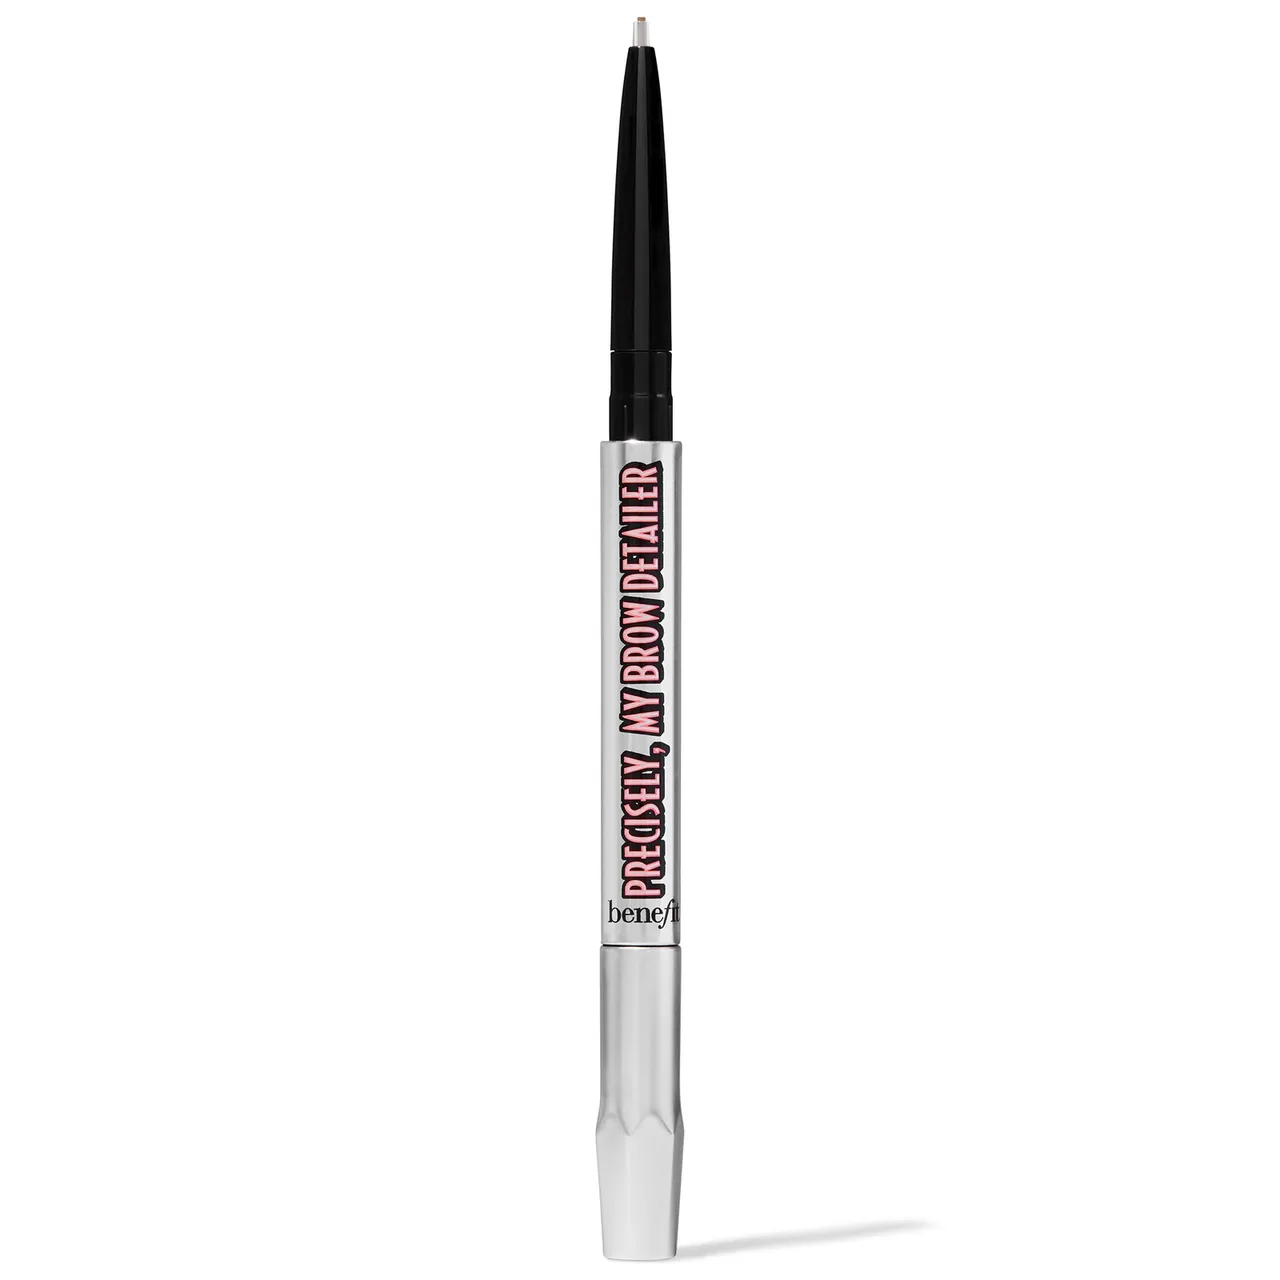 benefit Precisely My Brow Detailer Micro-Fine Precision Pencil 0.02g (Various Shades) - 3 Warm Light Brown